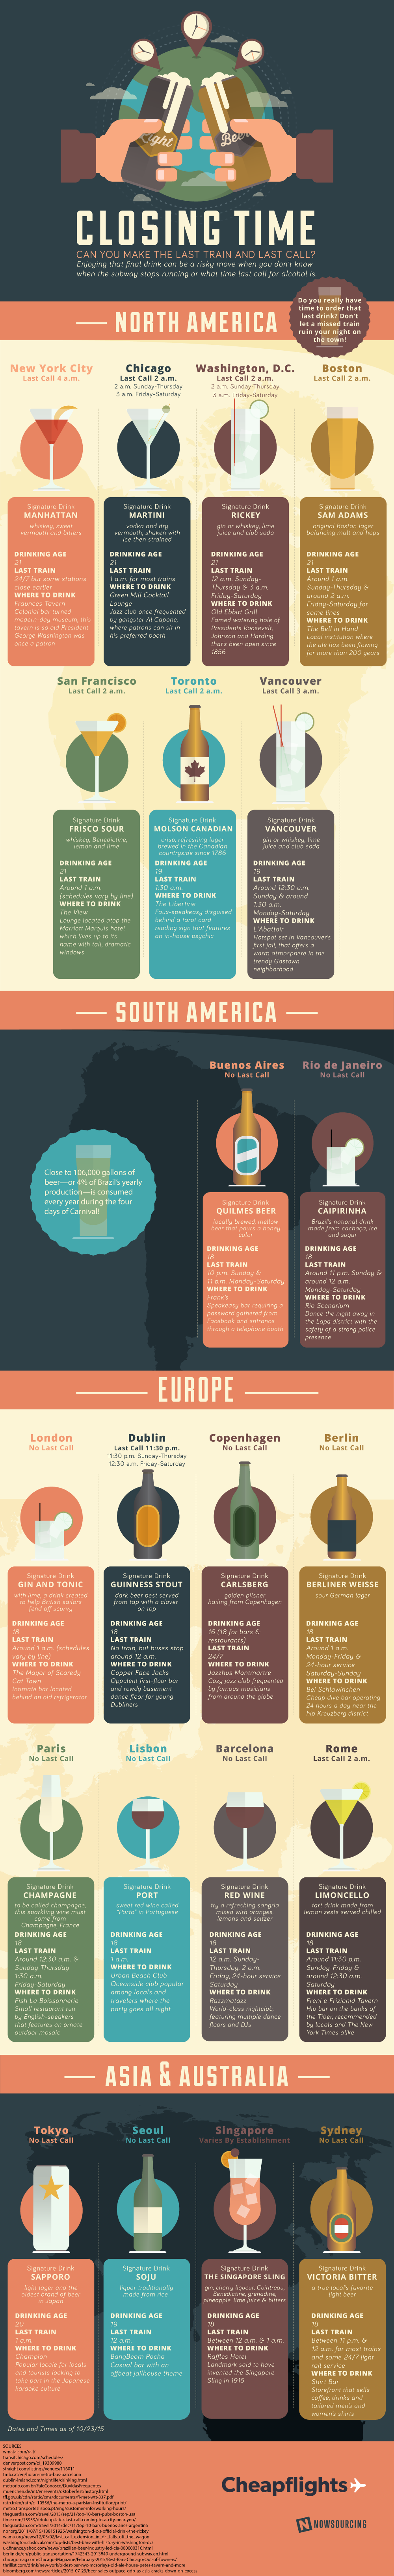 You Don’t Have To Go Home But You Can’t Stay Here [Infographic]